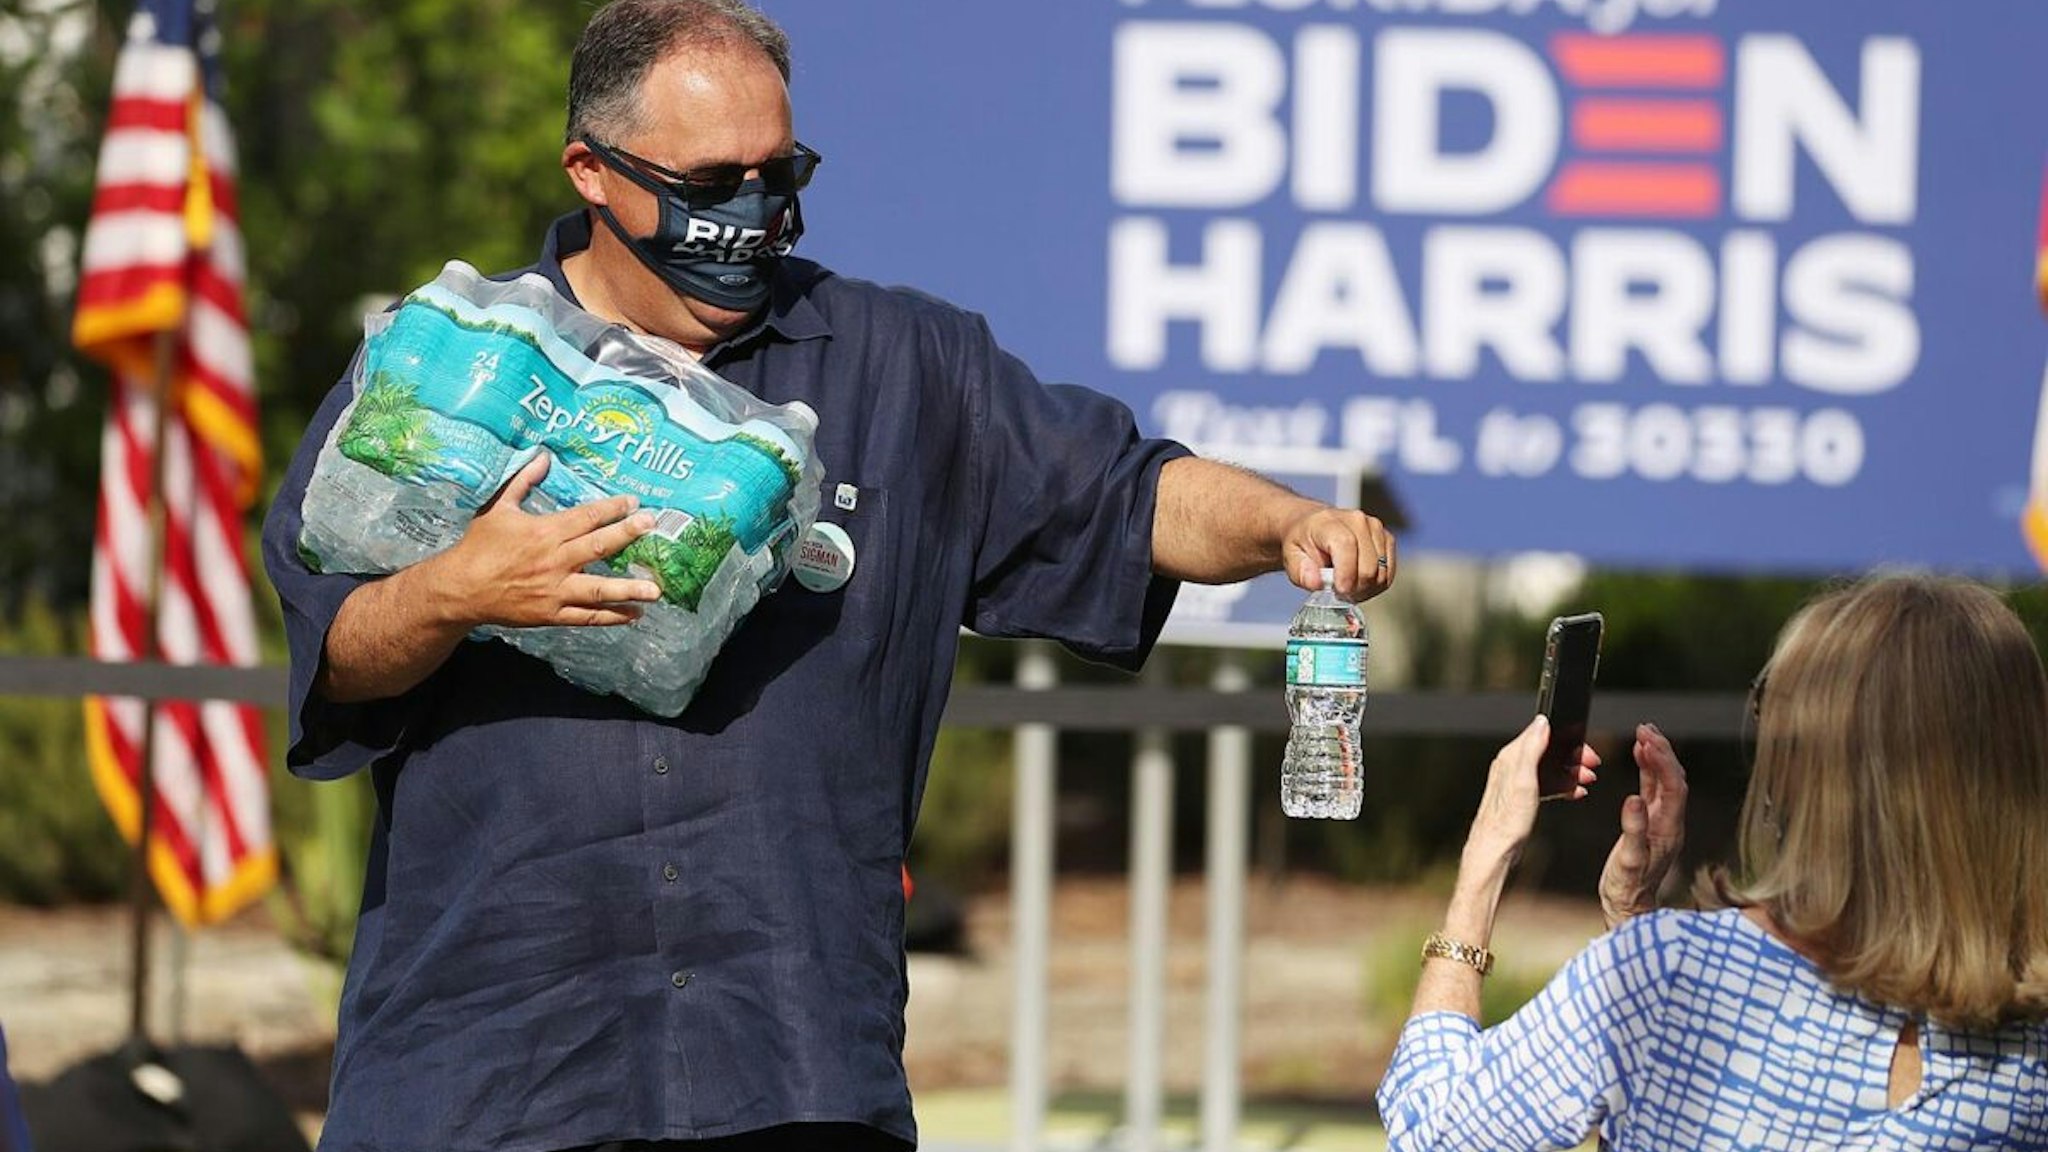 Stan Van Gundy hands out water to guests before a Women for Biden event at Van Gundys home in Lake Mary on Friday,October 16, 2020